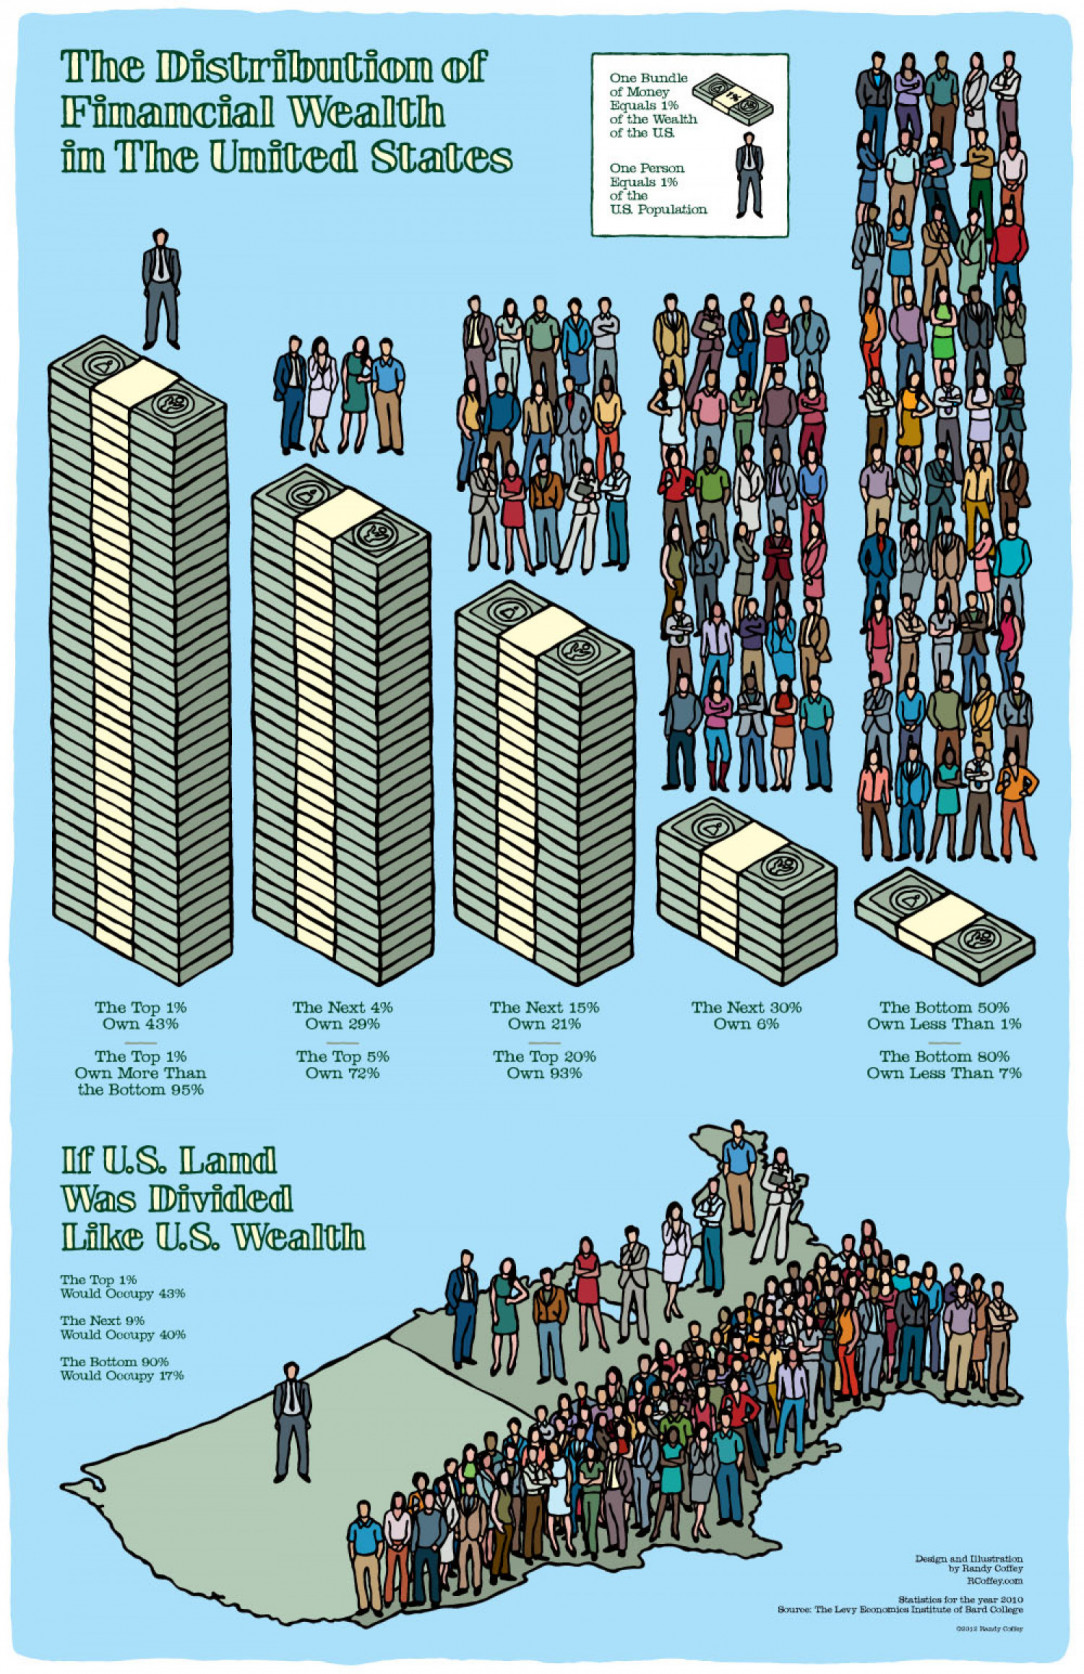 Wealth Distribution in the US